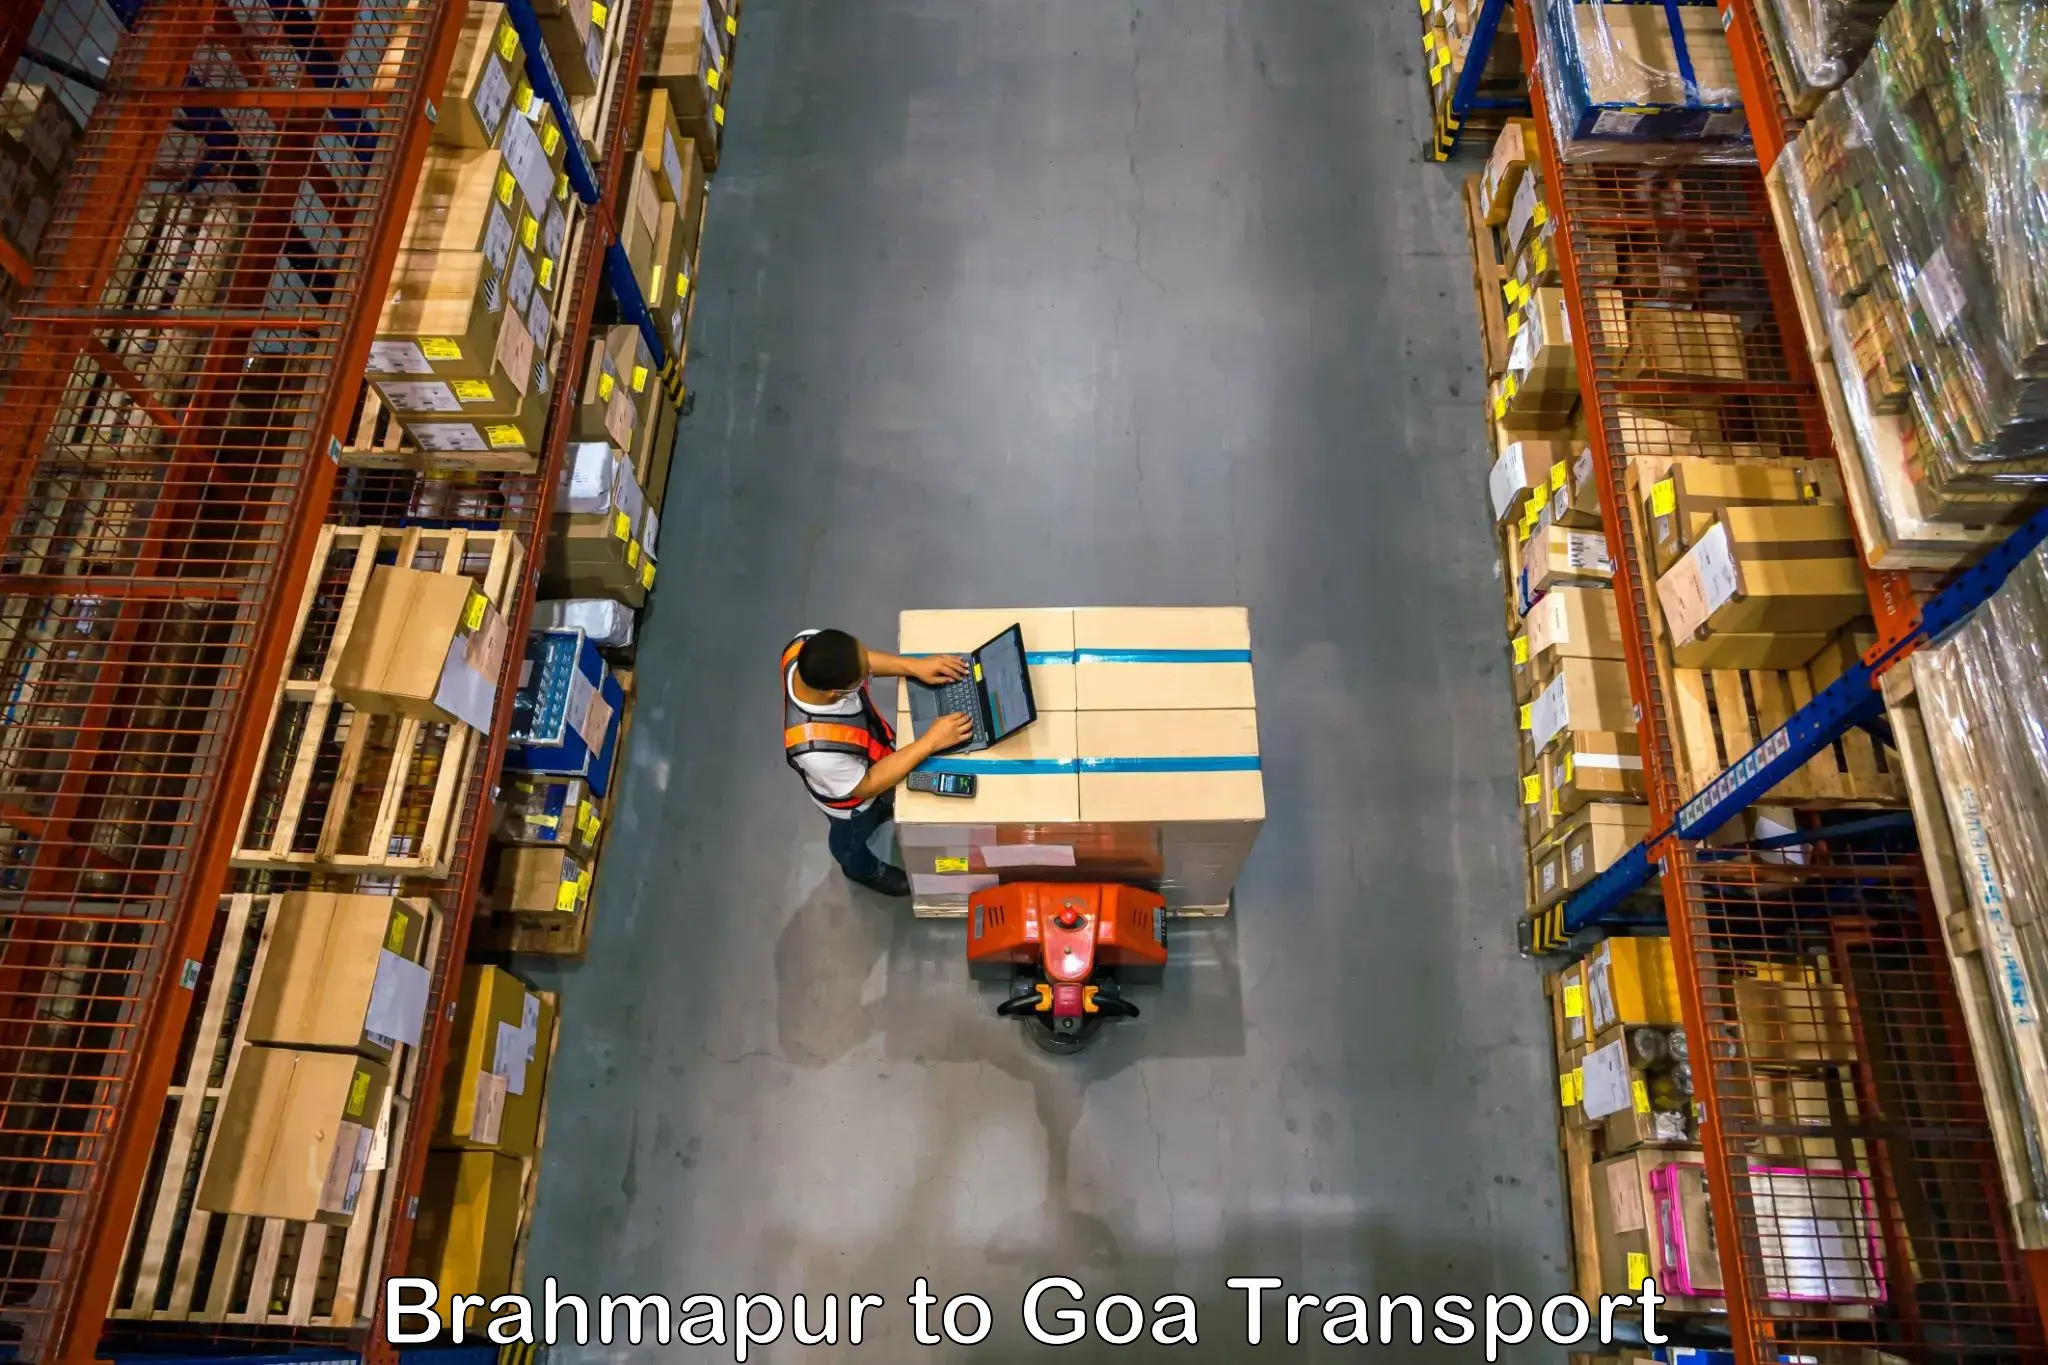 Transport bike from one state to another Brahmapur to Goa